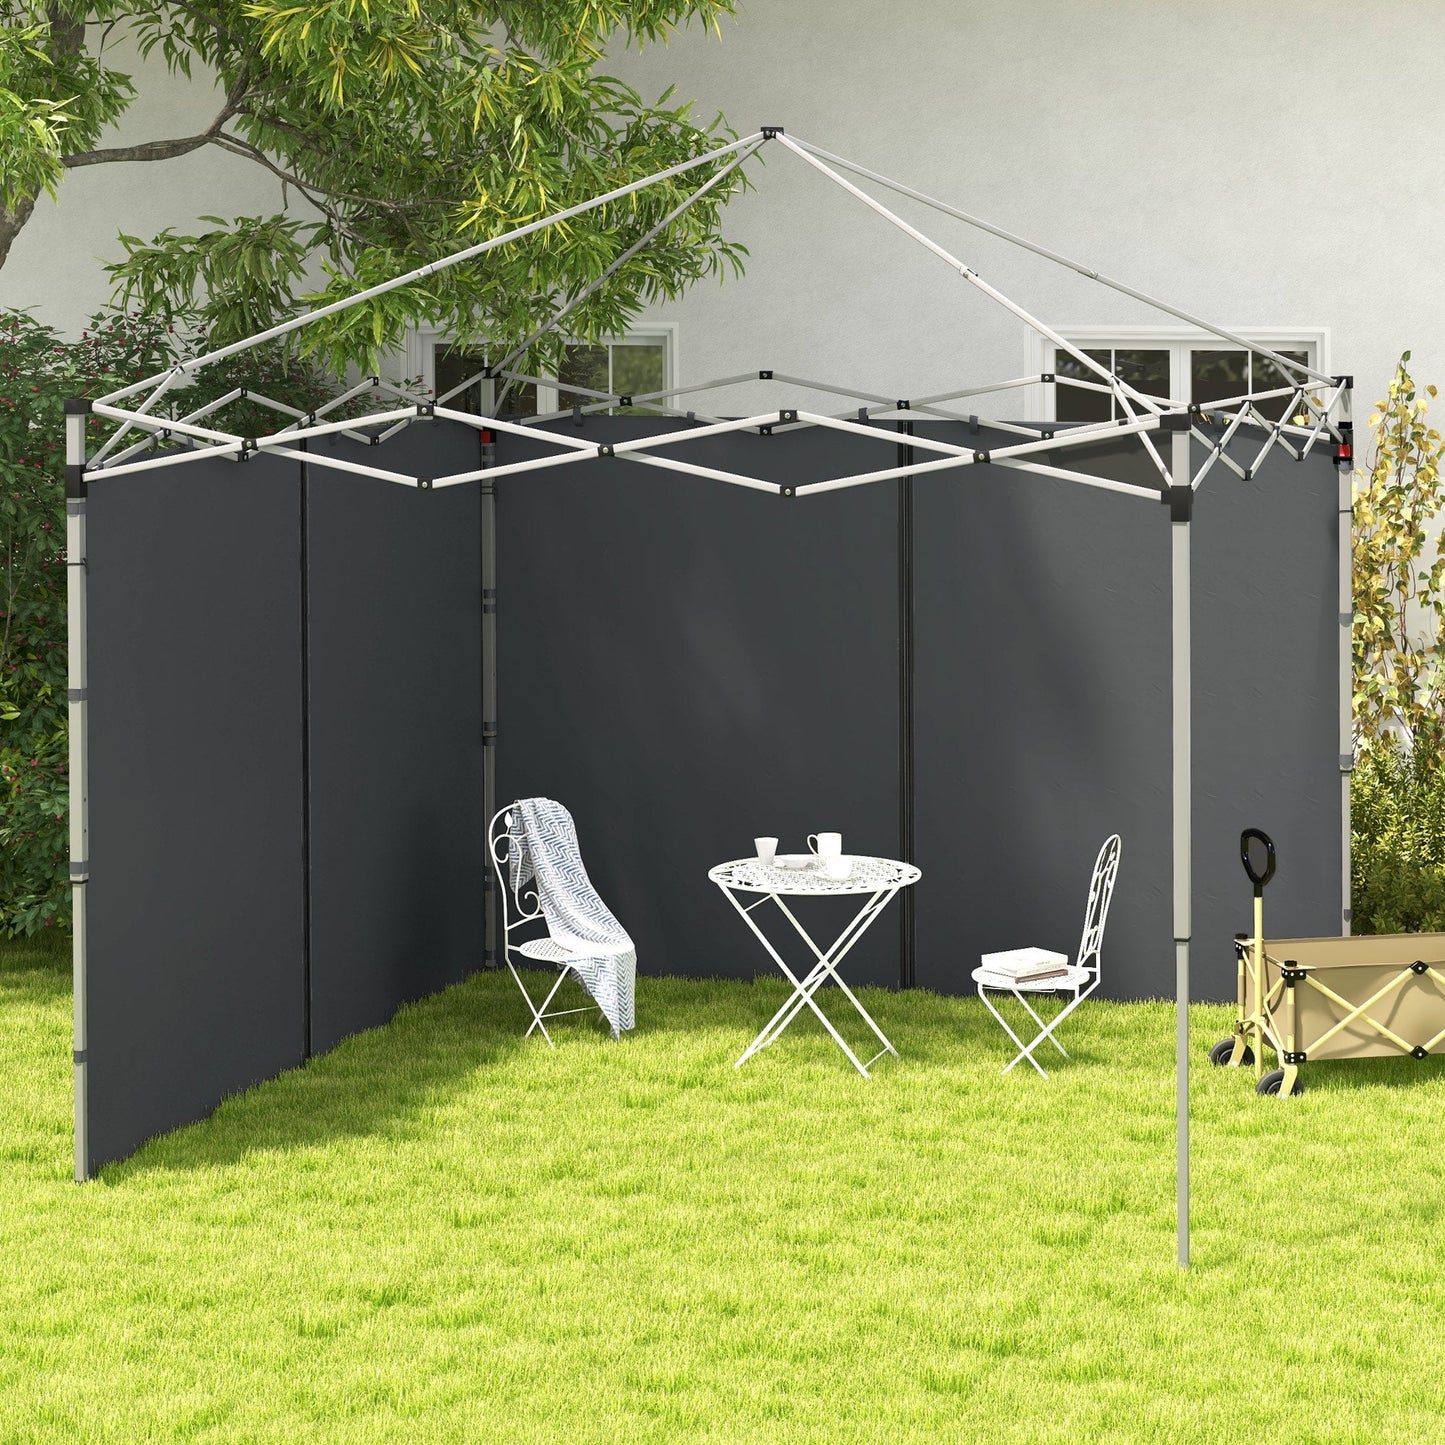 10' x 20' or 10' x 10' Pop Up Canopy Sidewalls, 2 Pack Gazebo Side Panels, Sides Replacement, with Zipped Doors at Gallery Canada